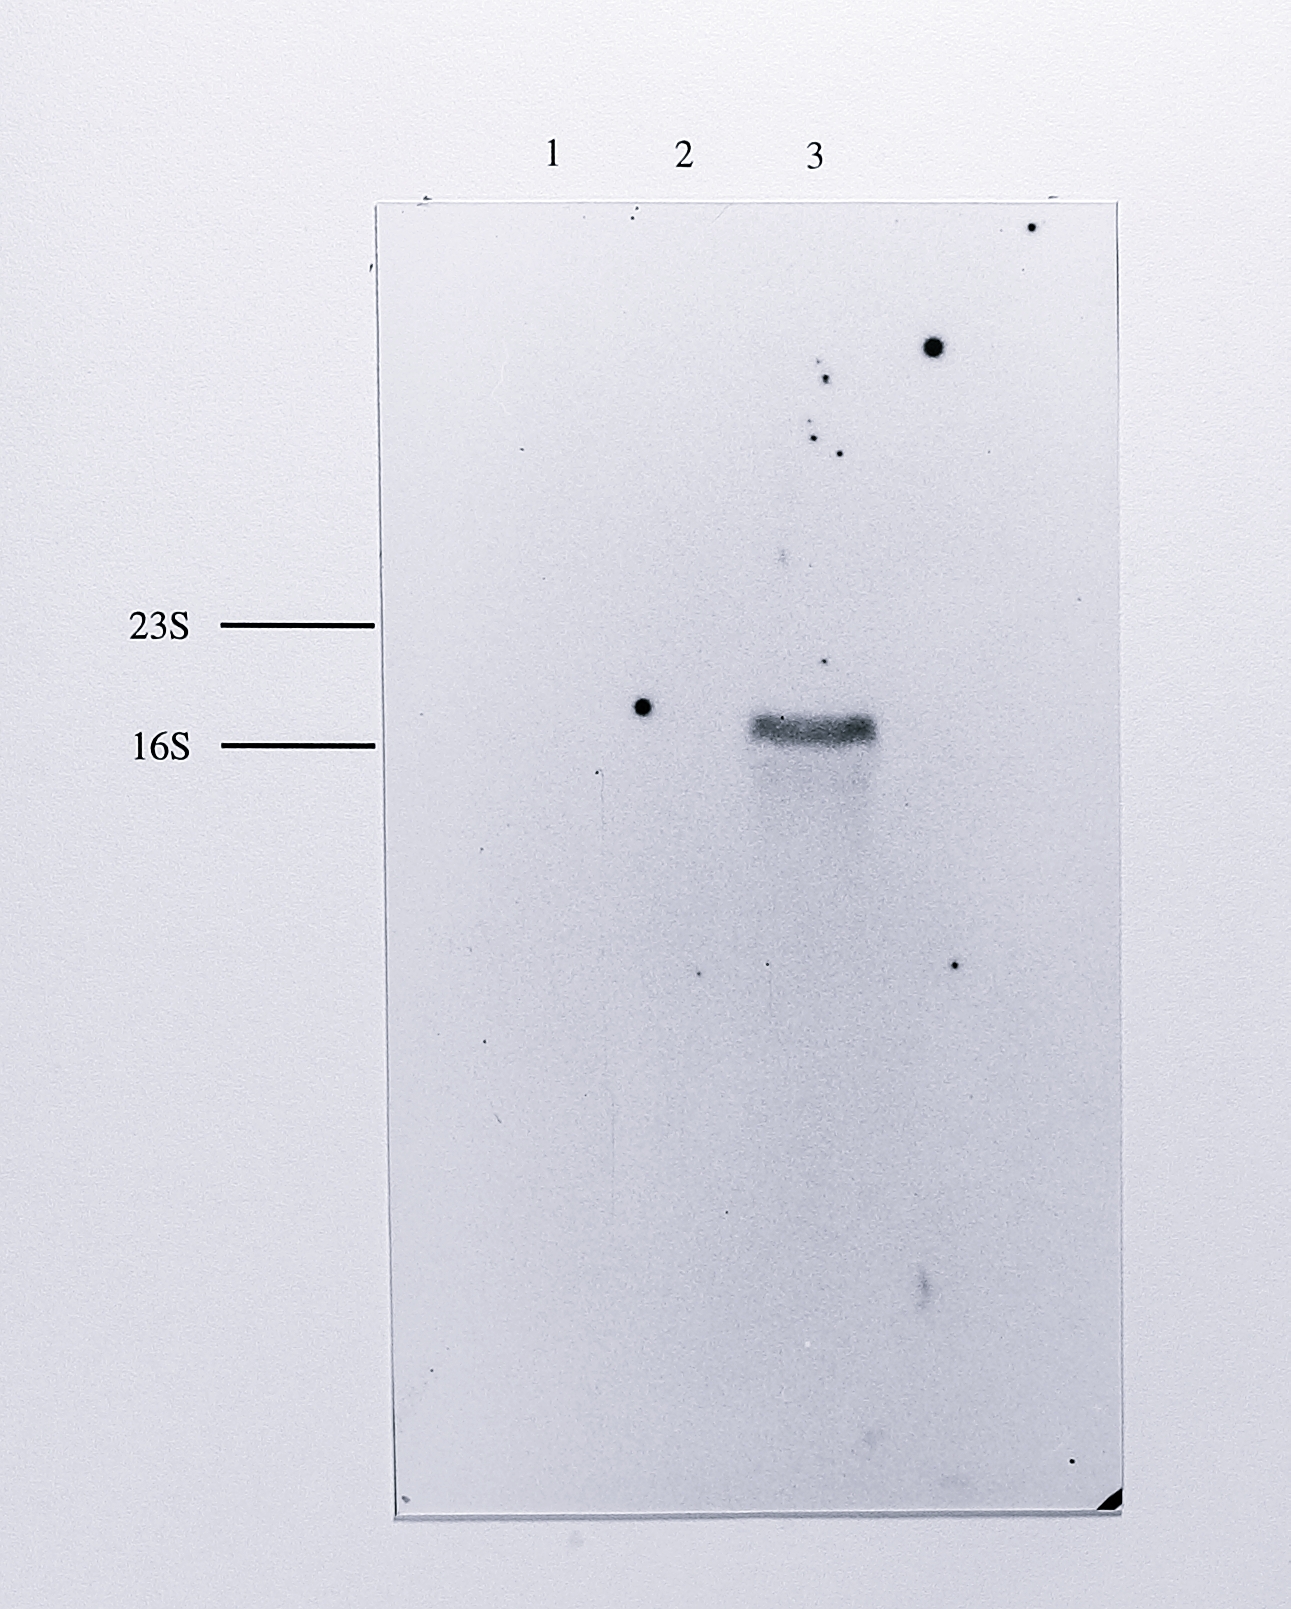 Northern blot of total RNA from anaerobically grown _T. pantotropha_, using a _nirS_-derived probe together with chemiluminescent detection. 10 $\mu$g of RNA from _T. pantotropha_ grown anaerobically (lane 3) and aerobically (lane 2) and 10 $\mu$g of RNA from _E. coli_ (lane 1) were separated by electrophoresis on a 1% agarose-formaldehyde gel, transferred to positive nylon and hybridised to a probe for the _nirS_ gene as in Figure 7.2. The hybridised probe was detected using the chemiluminescent alkaline phosphatase substrate CSPD and the blot was exposed to X-ray film for 1 hour. A single band of approximate mobility 1.85 kb was detected in the lane containing RNA from anaerobically grown _T. pantotropha_. The very high stringency of the chemiluminescent detection protocol meant that no background was visible on the developed film; the outline of the original blot is the frame of the photograph. The relative positions of the 23S (2904 bases) and 16S (1541 bases) ribosomal RNAs species are shown at the left of the blot.